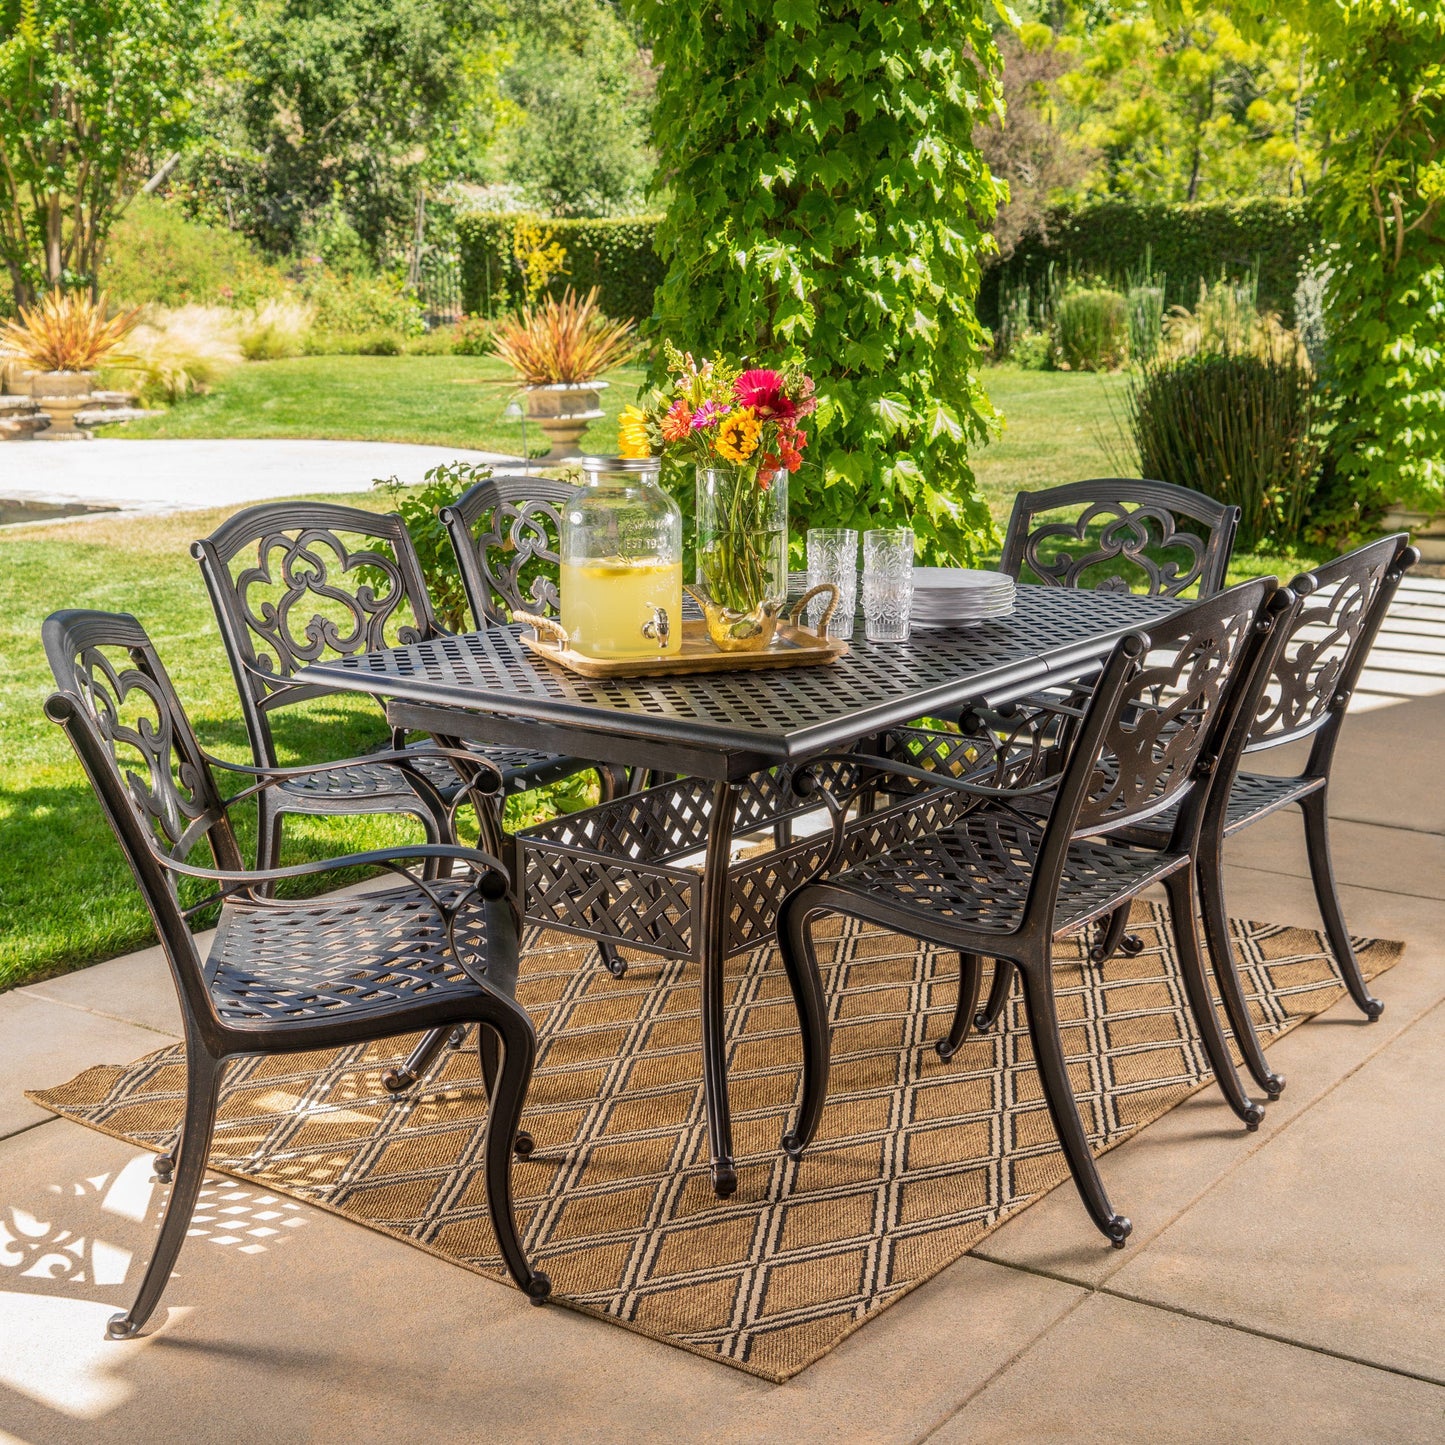 Ariel Outdoor 7 Pc Cast Aluminum Dining Set with Extension Leaf